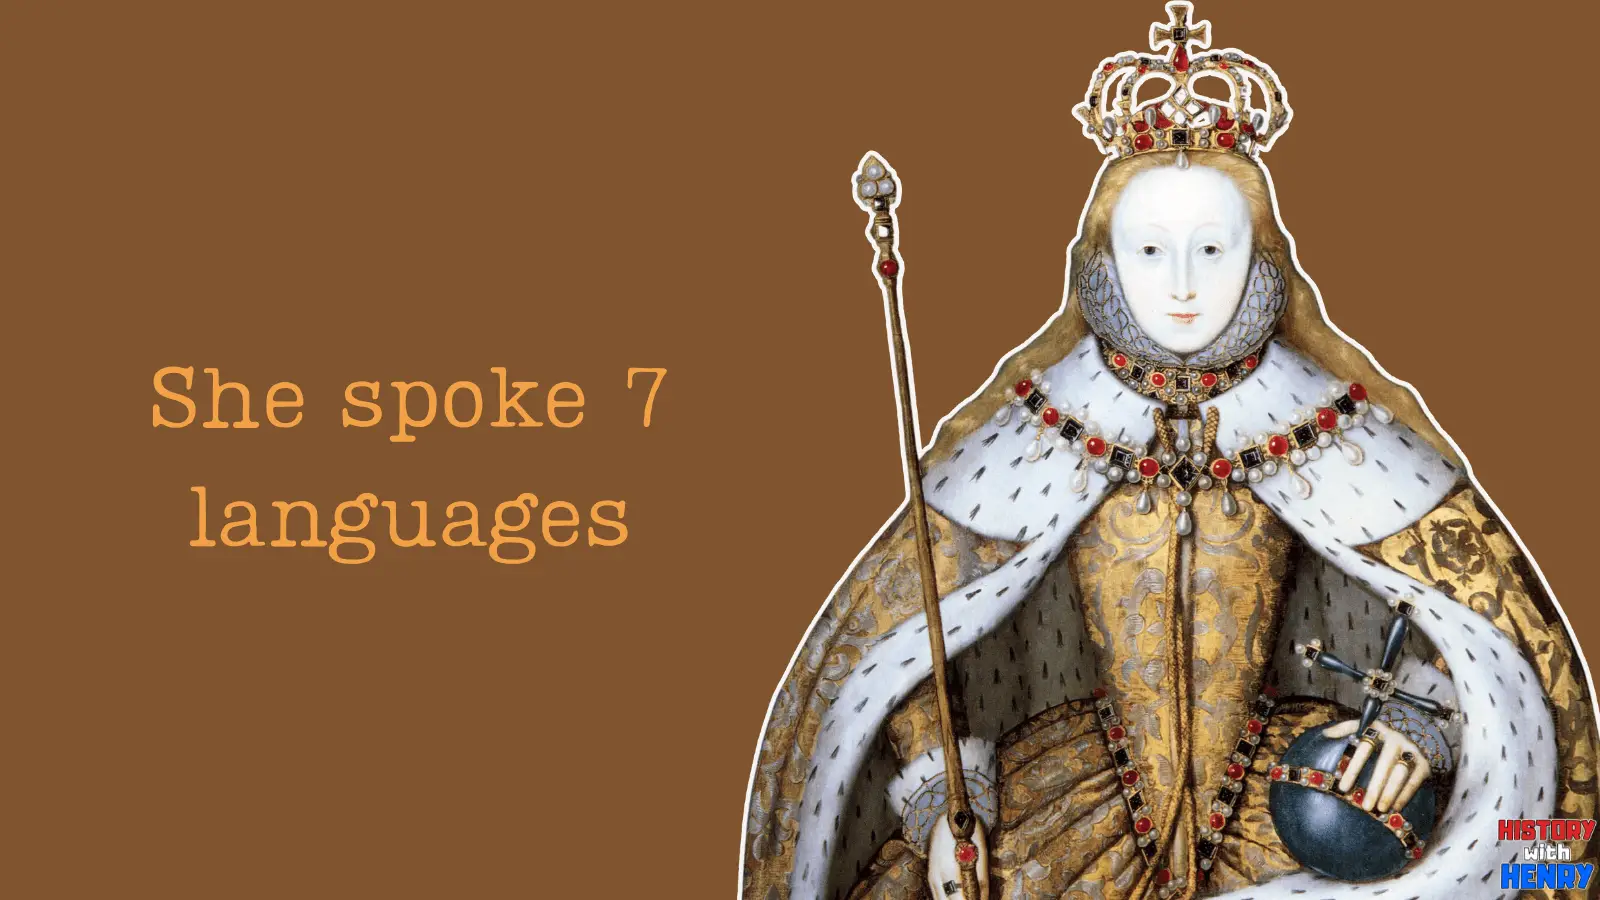 13 Facts About Elizabeth I